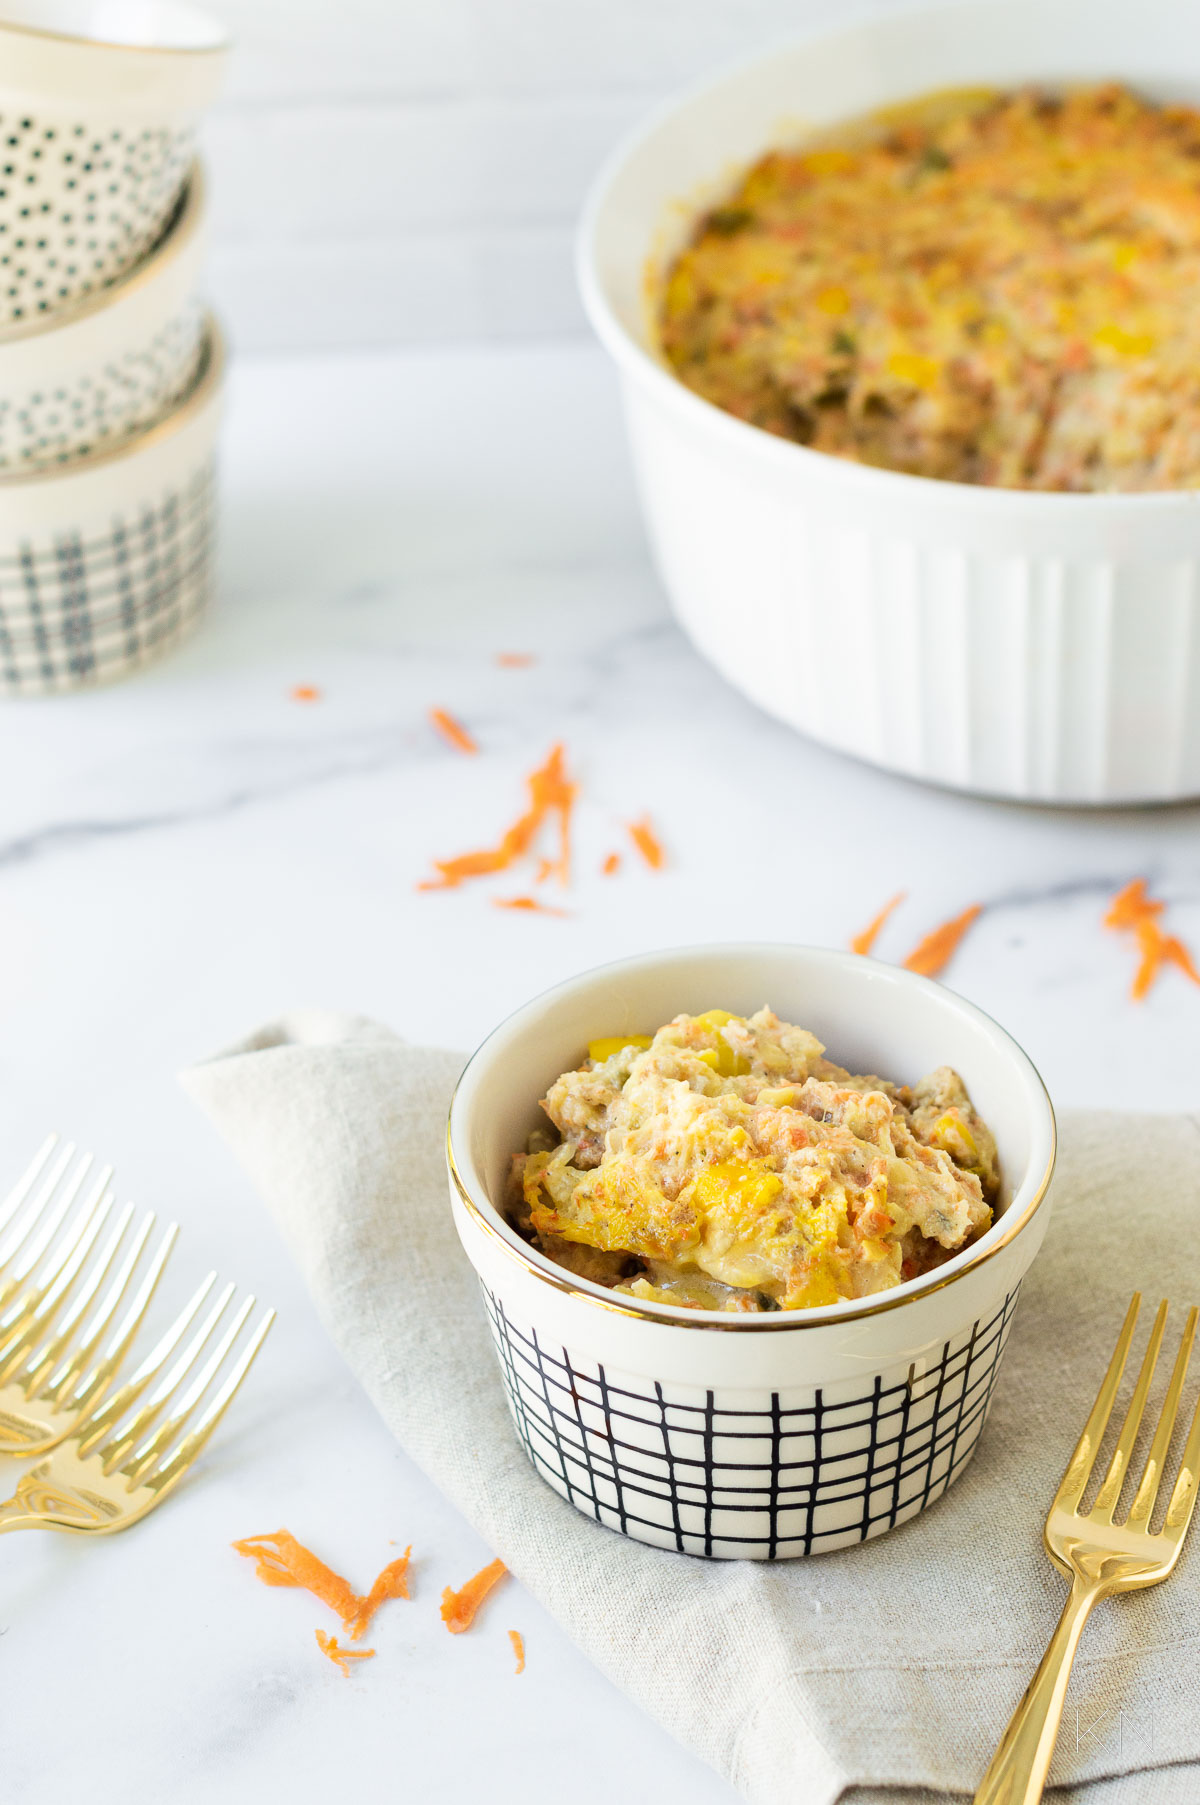 Yummy Dinner Sides You May Not Think Of: Squash Casserole